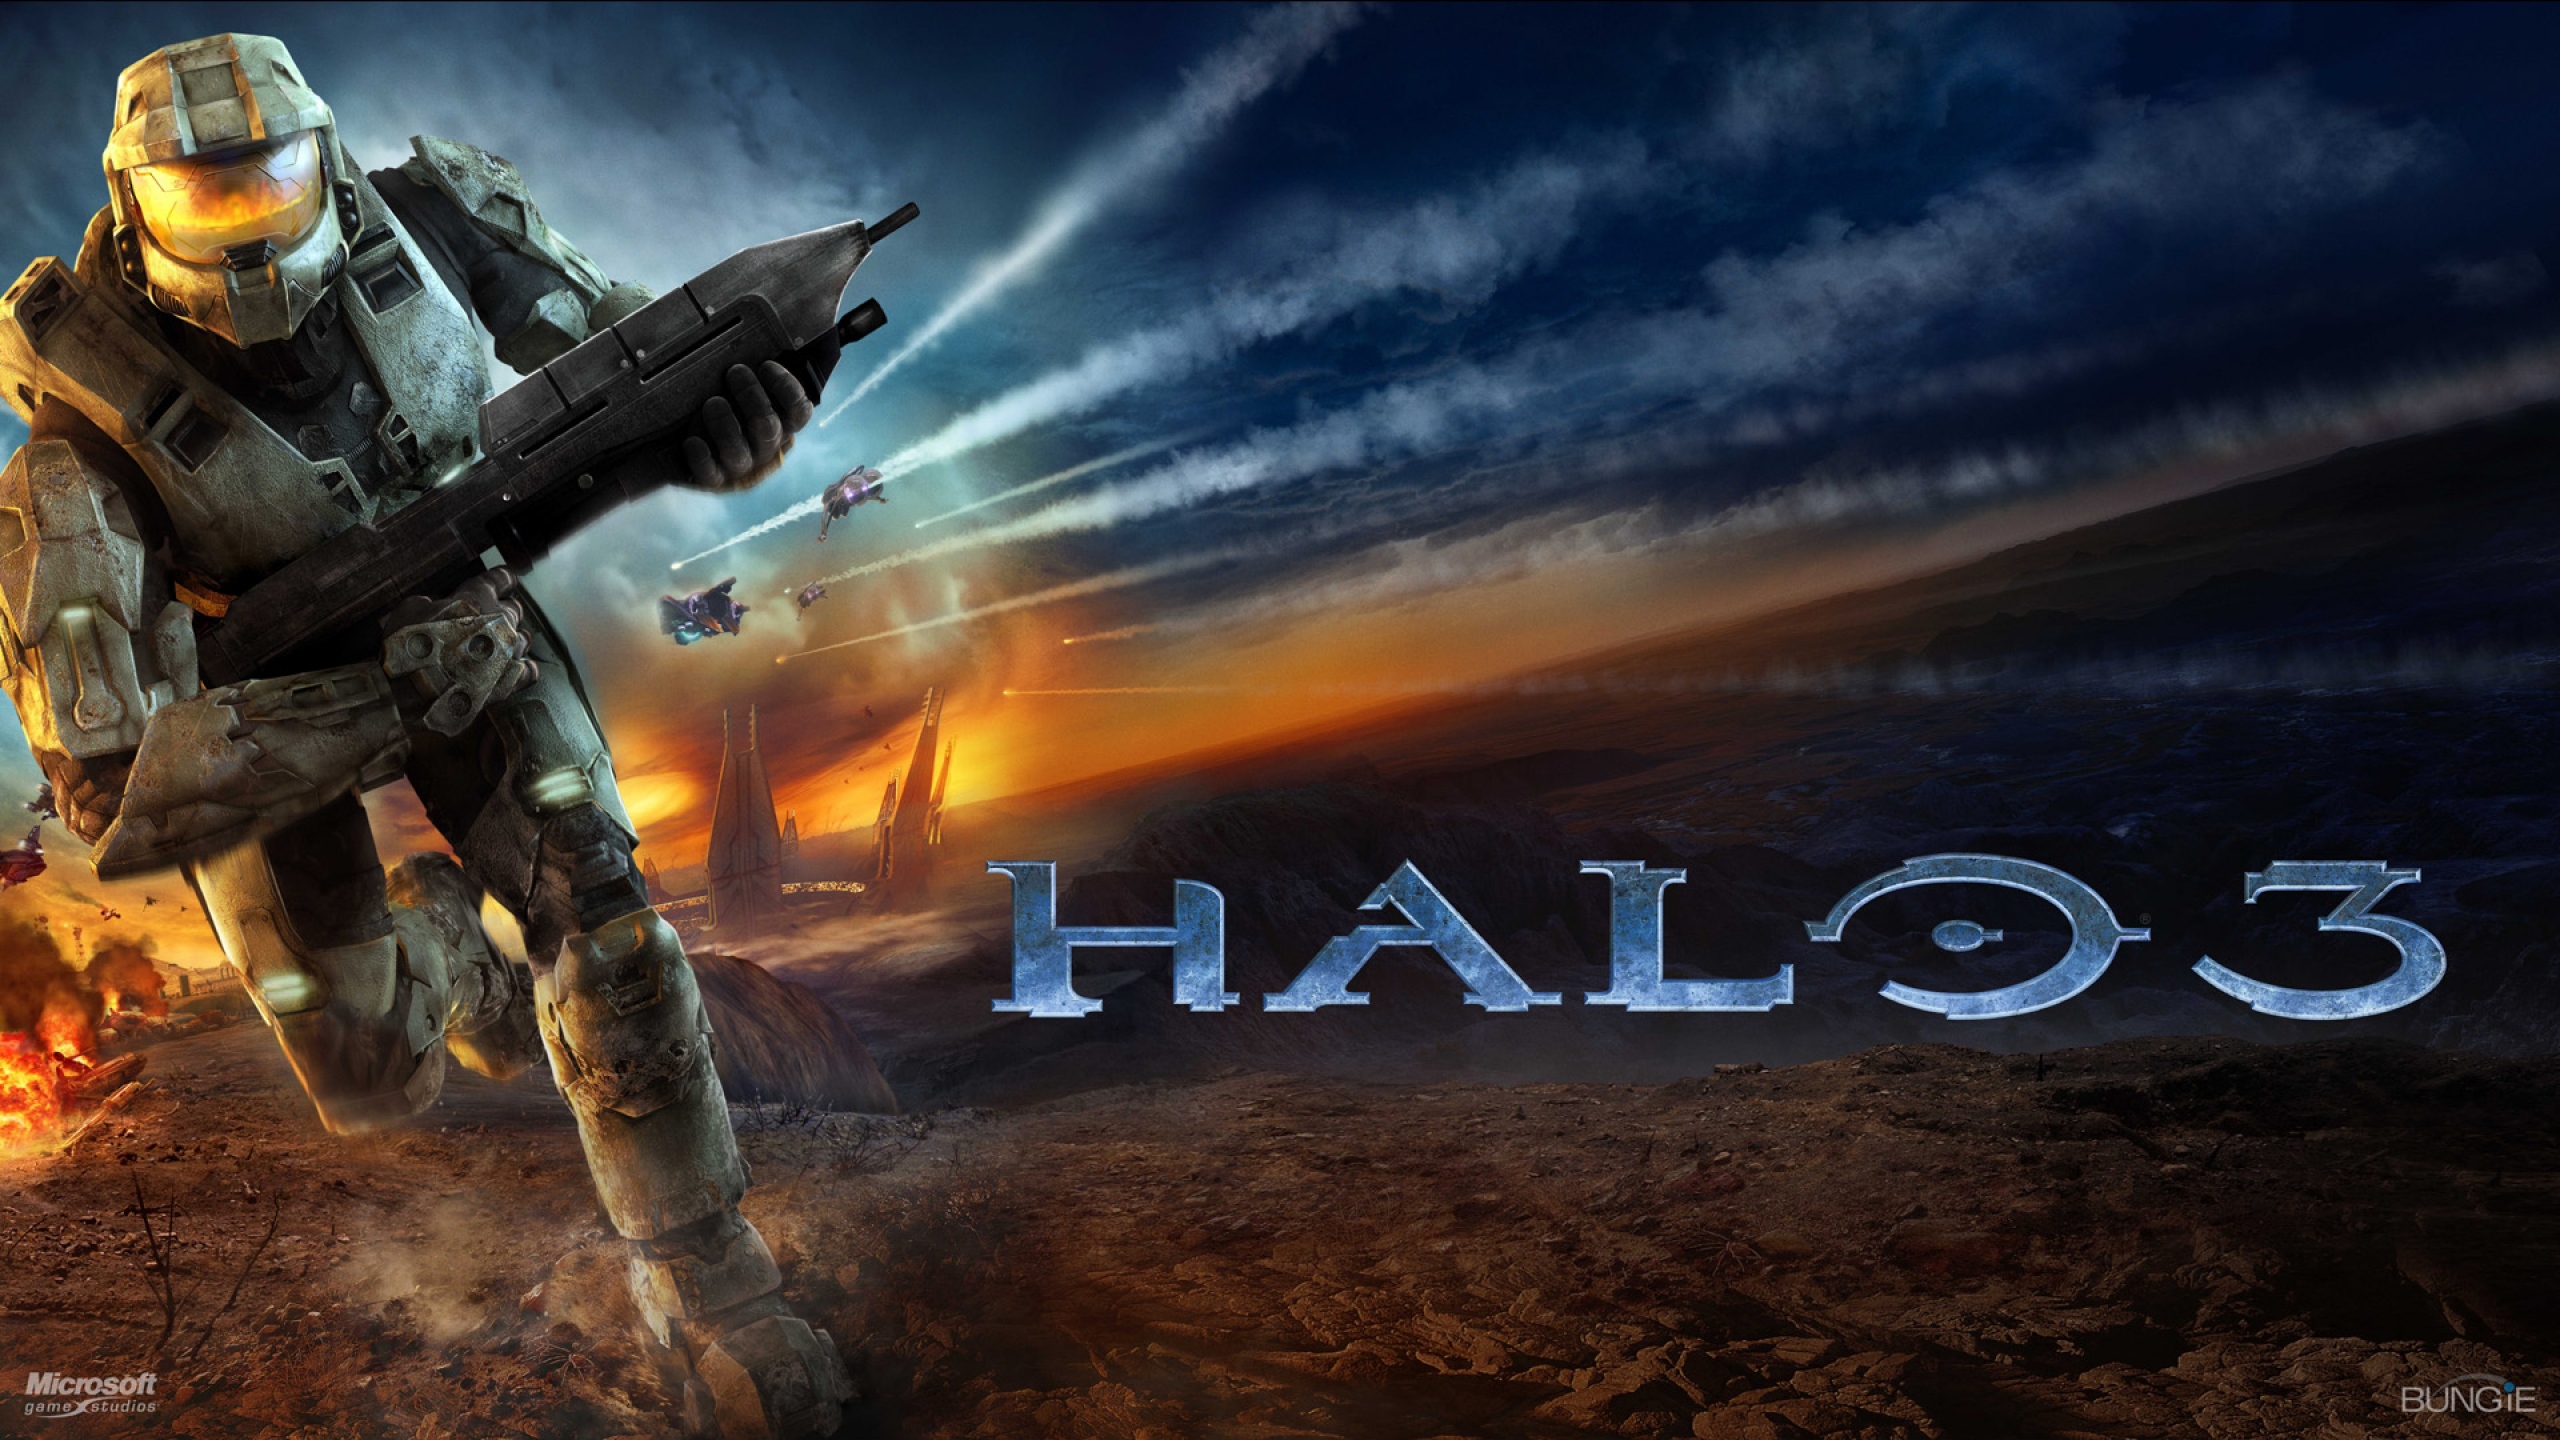 halo 5 guardians pc download free